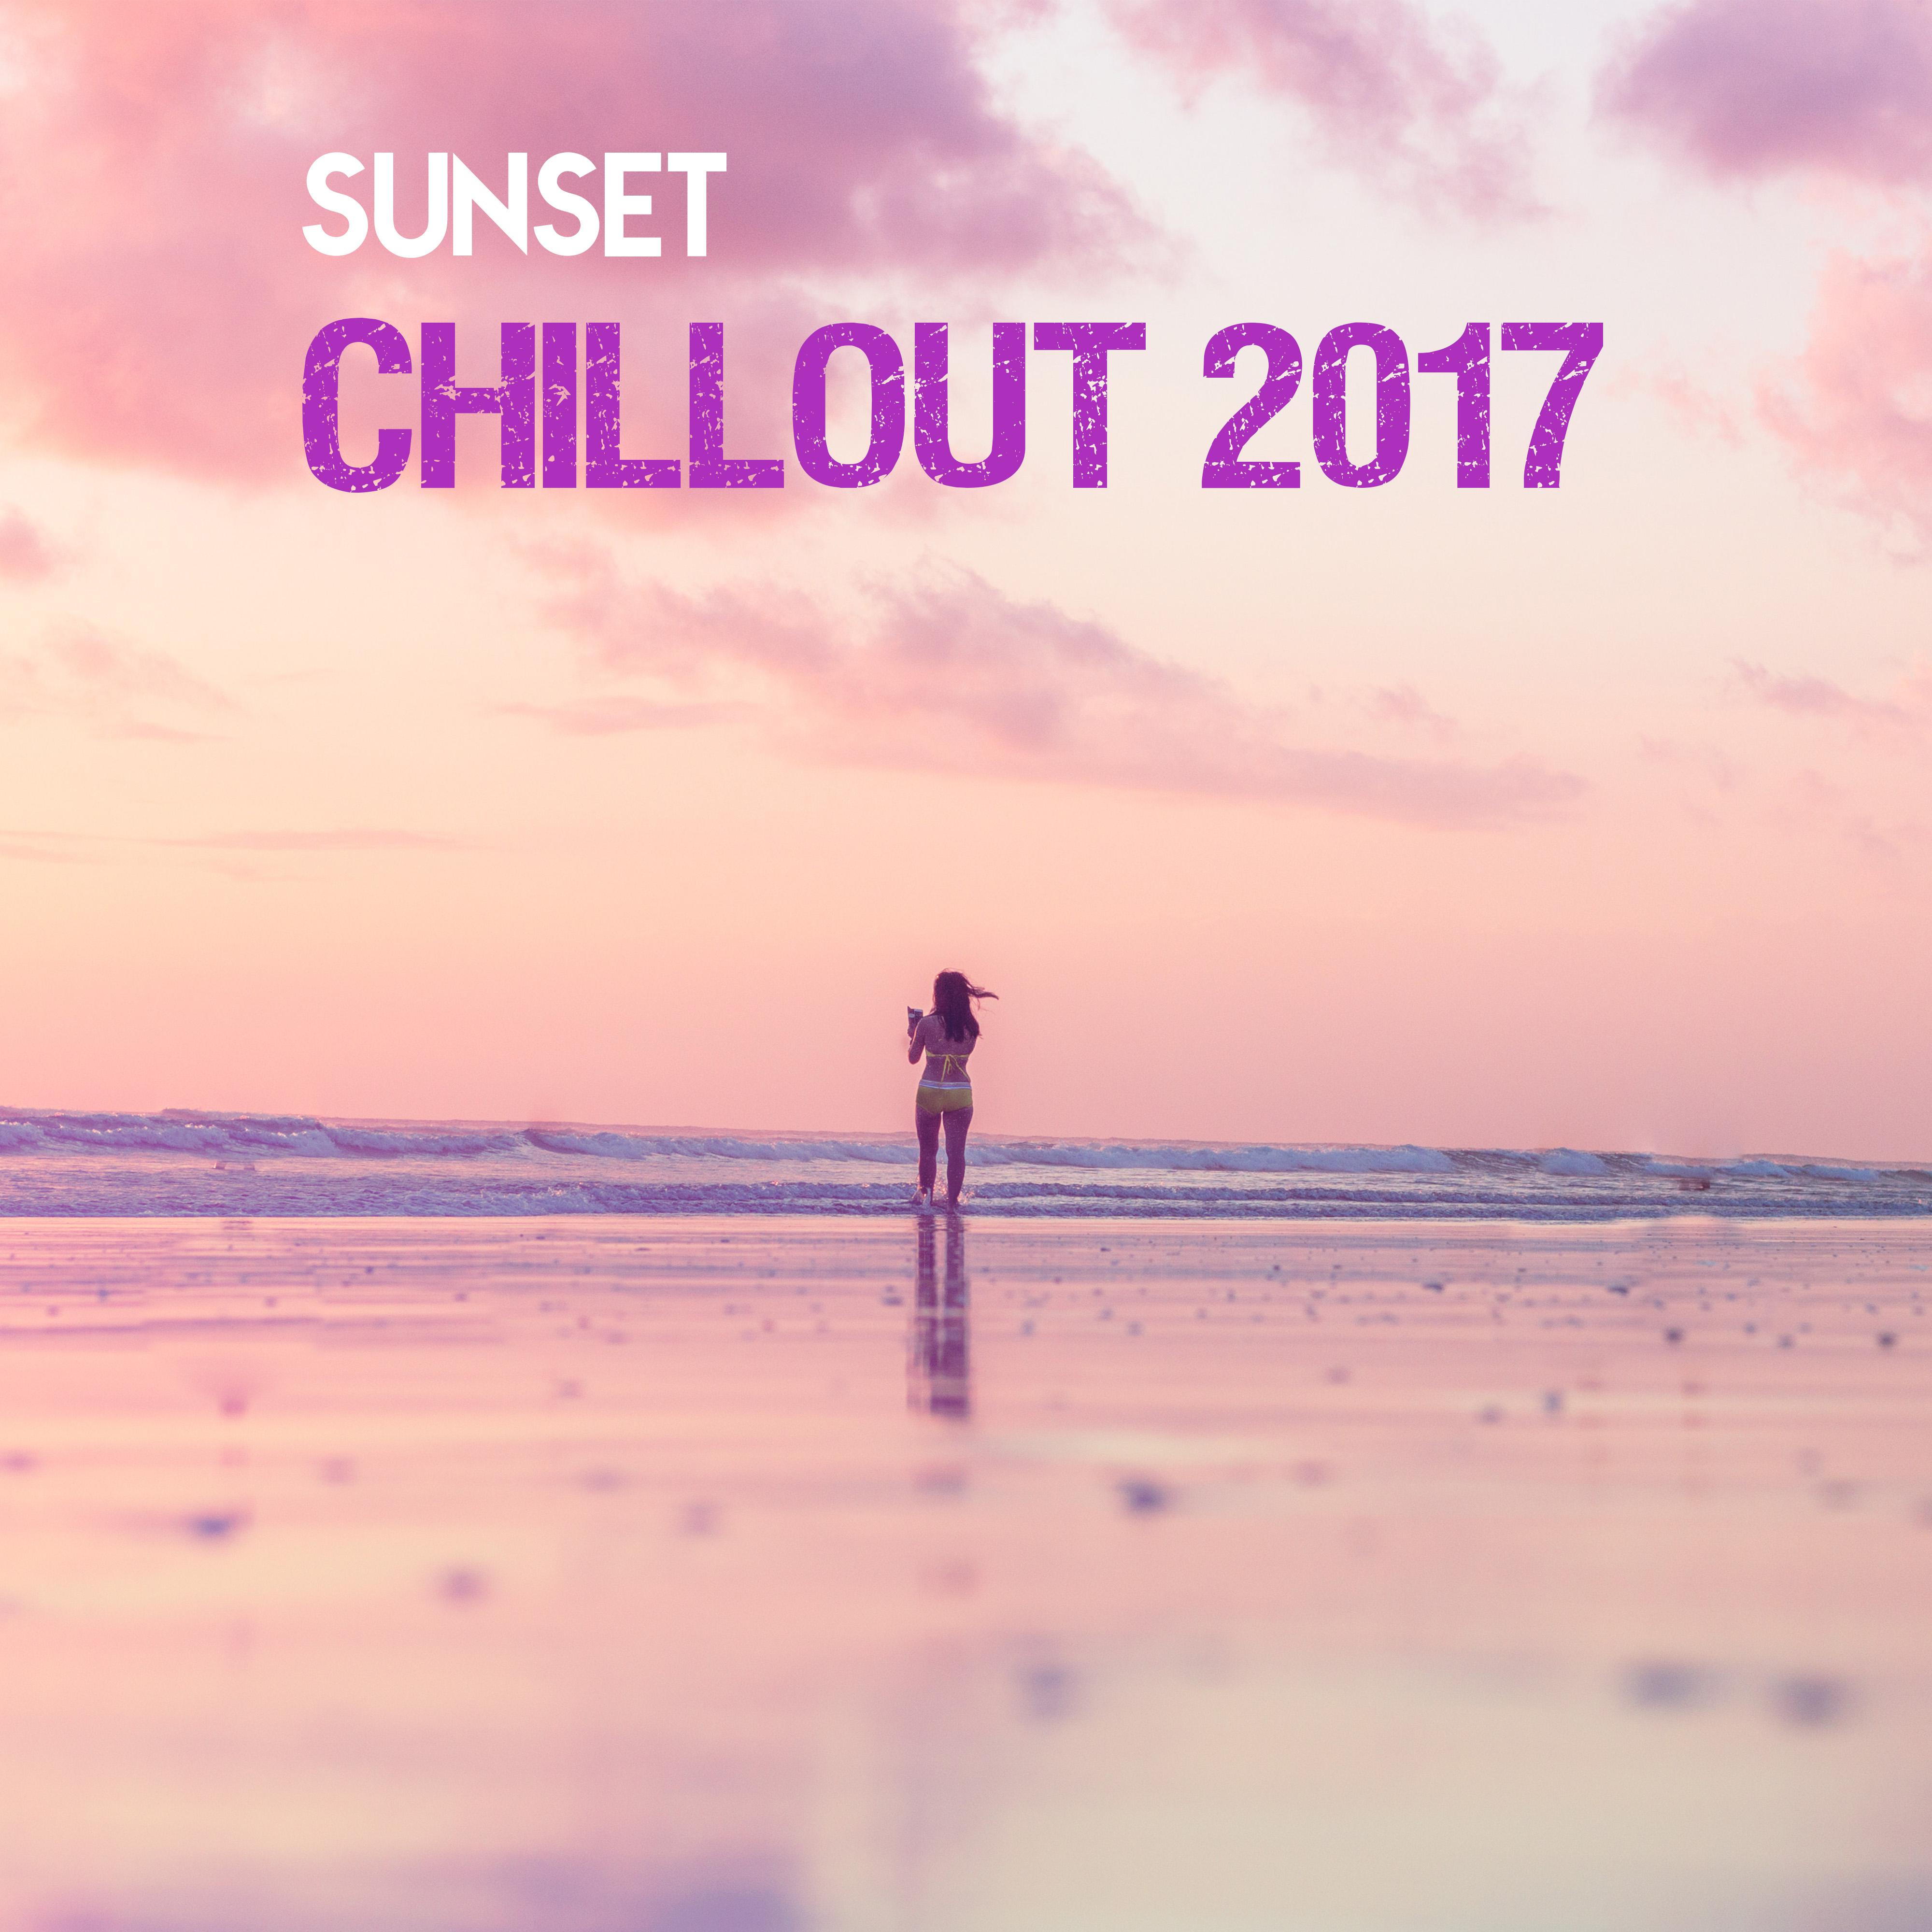 Sunset Chillout 2017 – Party On The Beach, Ibiza Dancefloor, Relax Under The Palms